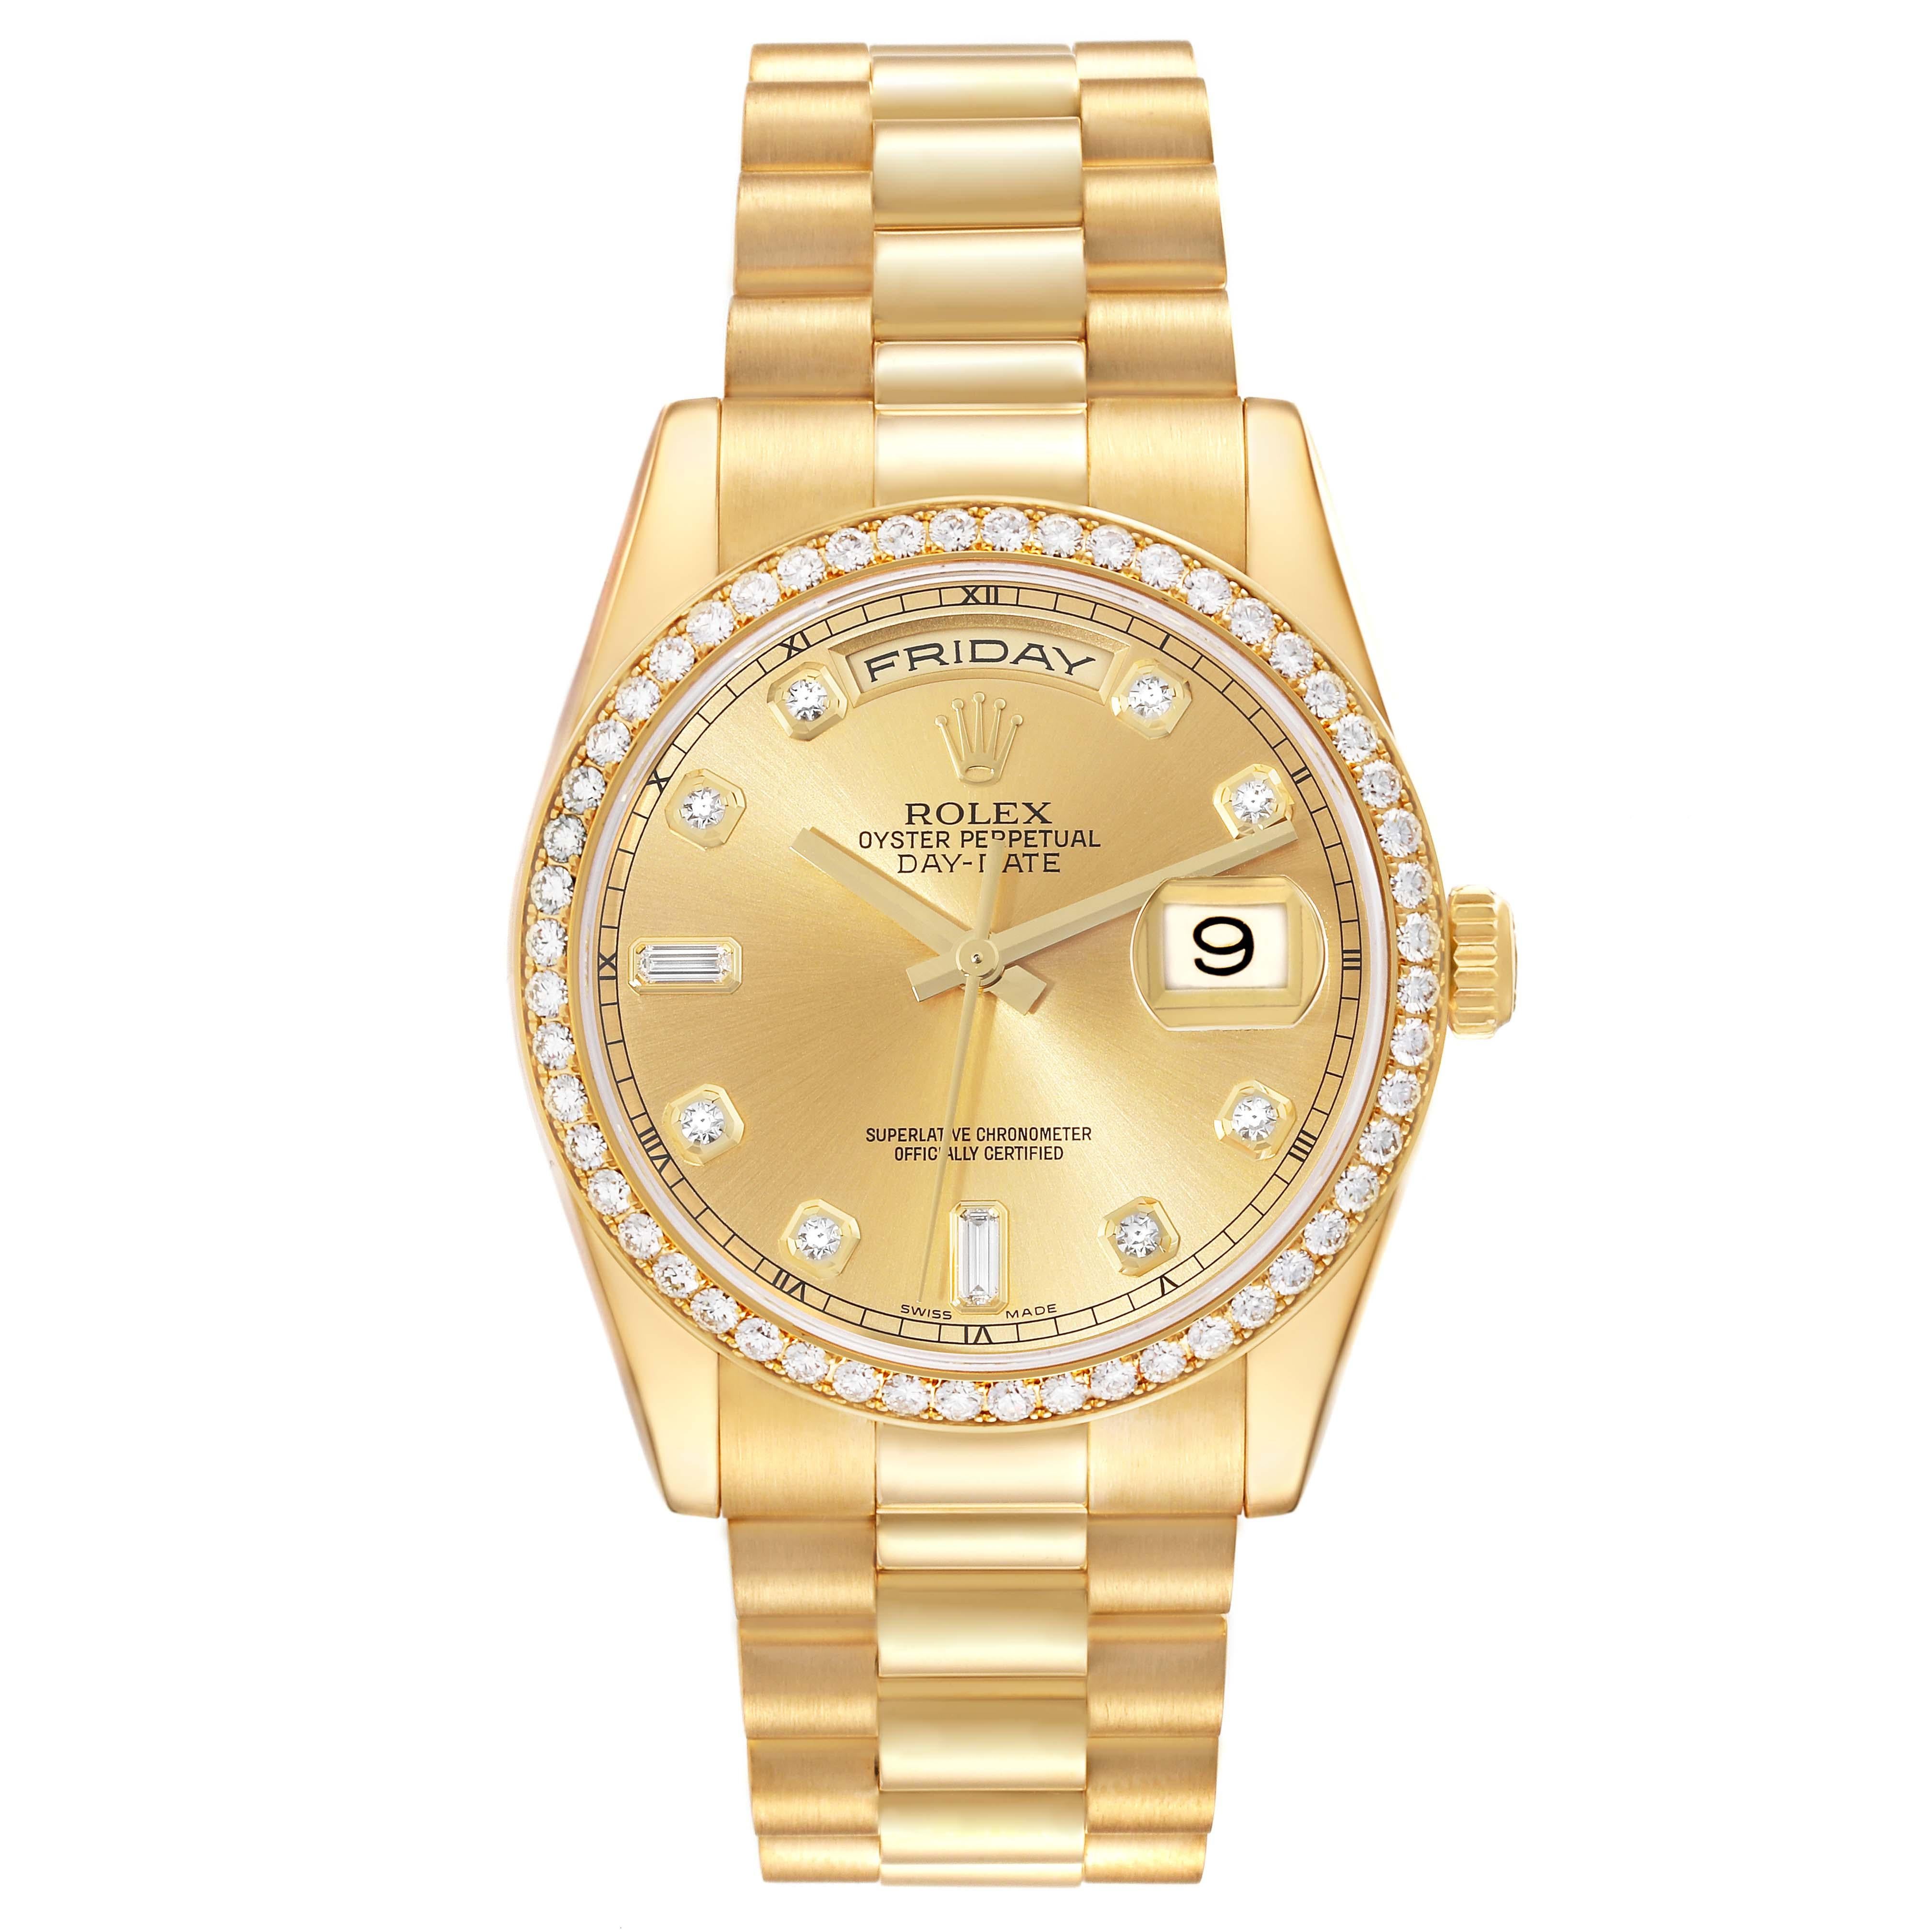 Rolex Day Date President Yellow Gold Diamond Bezel Mens Watch 118348 Box Card. Officially certified chronometer automatic self-winding movement. 18k yellow gold oyster case 36 mm in diameter. Rolex logo on the crown. 18K yellow gold bezel set with